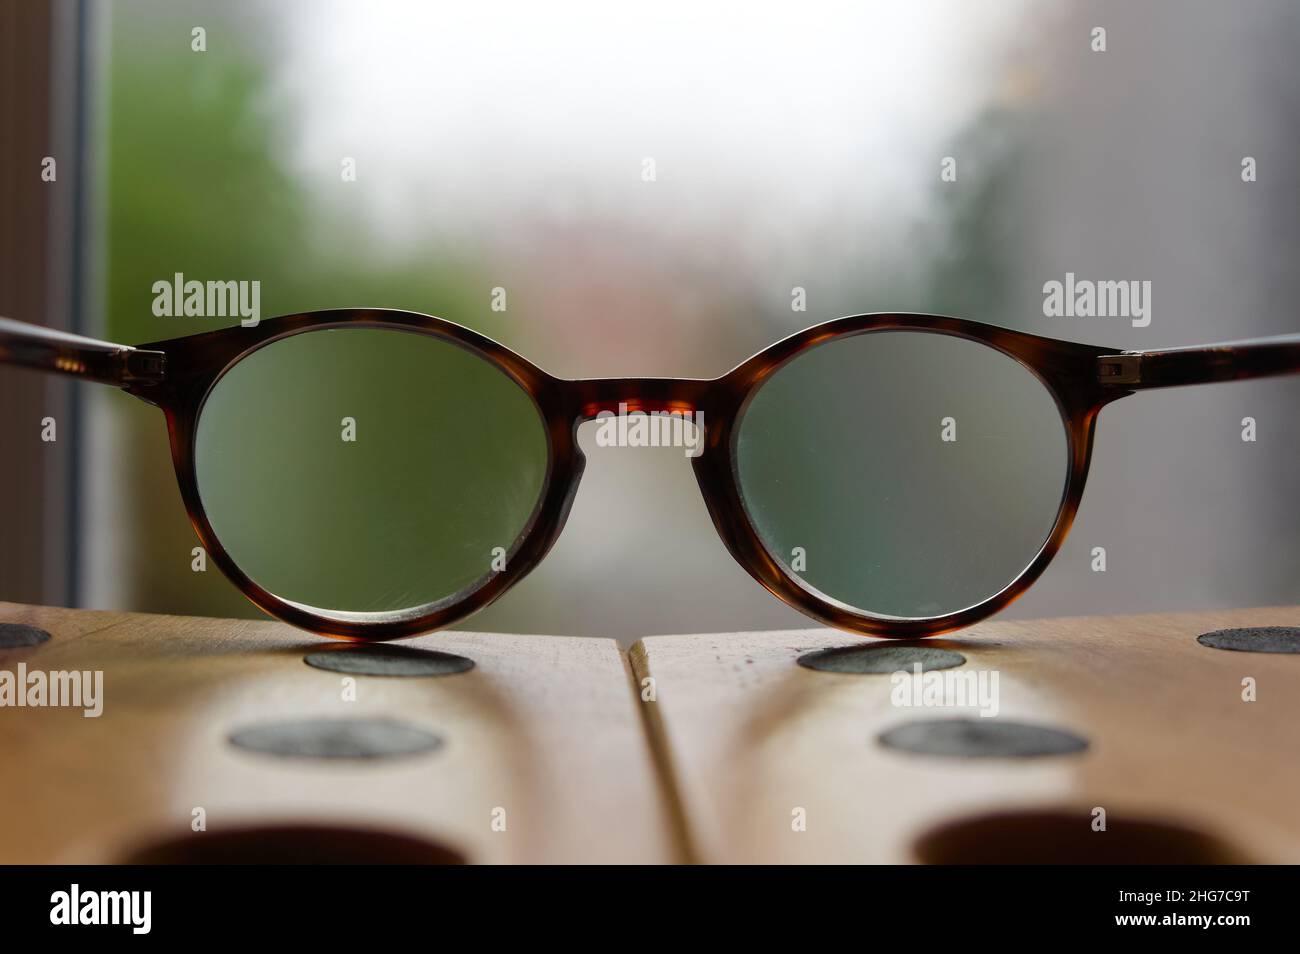 Looking through spectacles on a table with defocused window light background Stock Photo